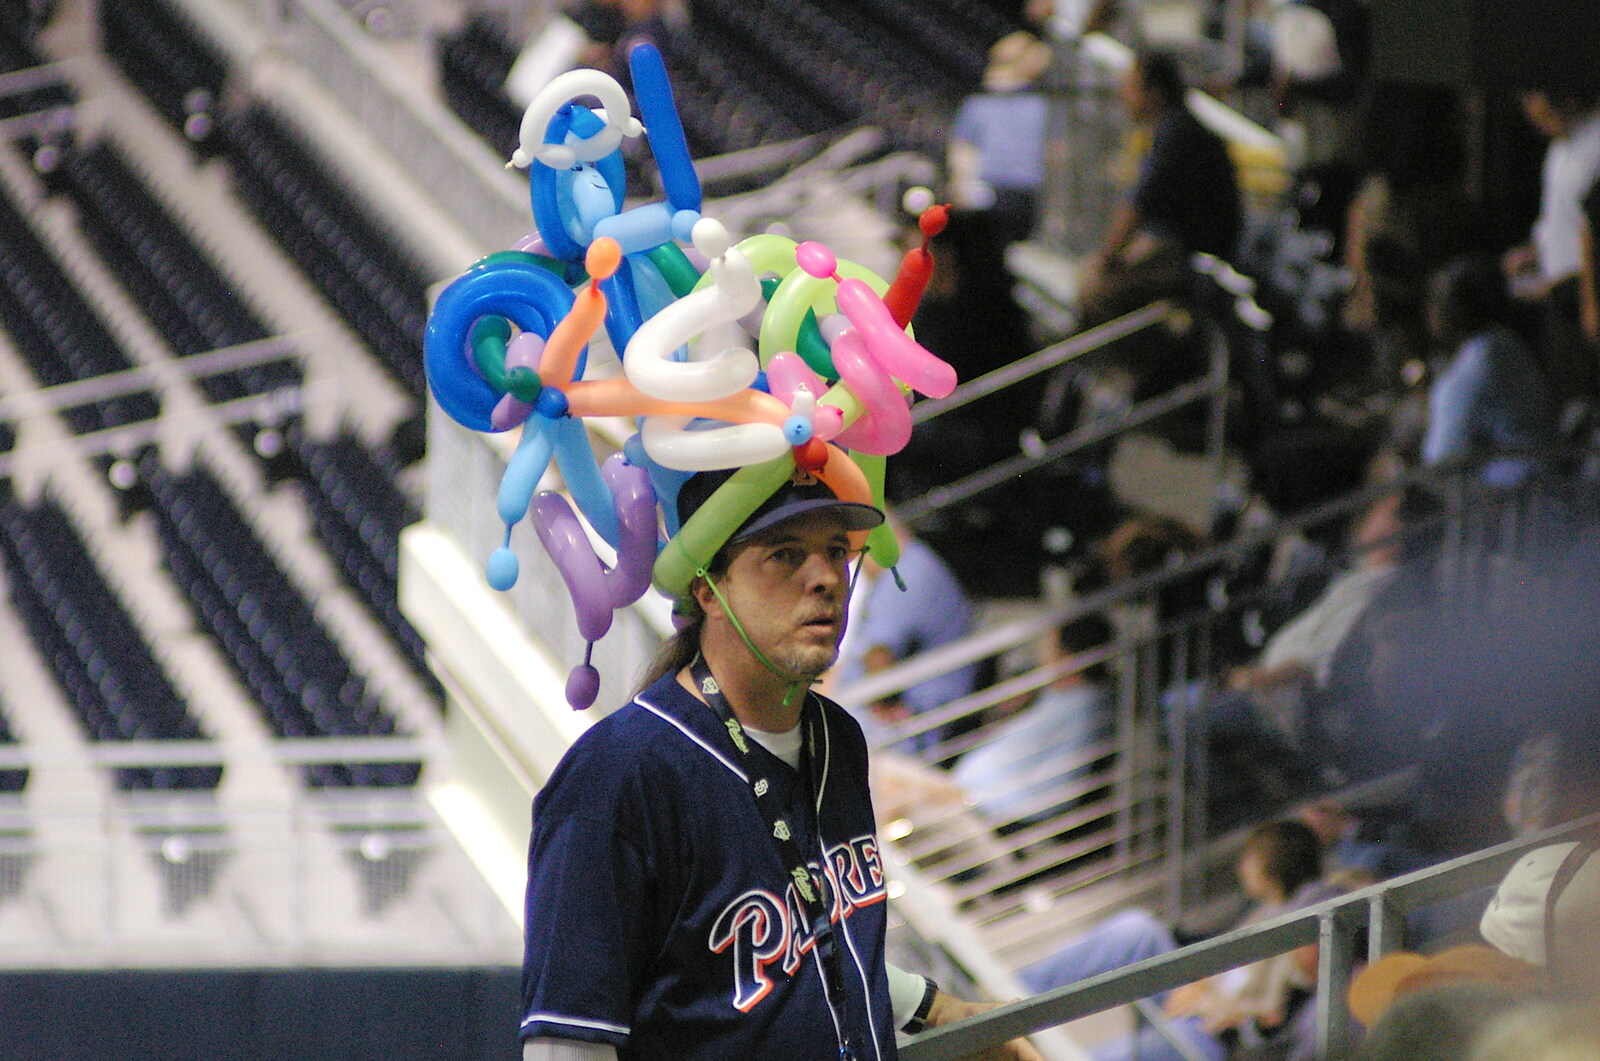 The guy with the balloon hat from The Padres at Petco Park: a Baseball Game, San Diego, California - 31st May 2005